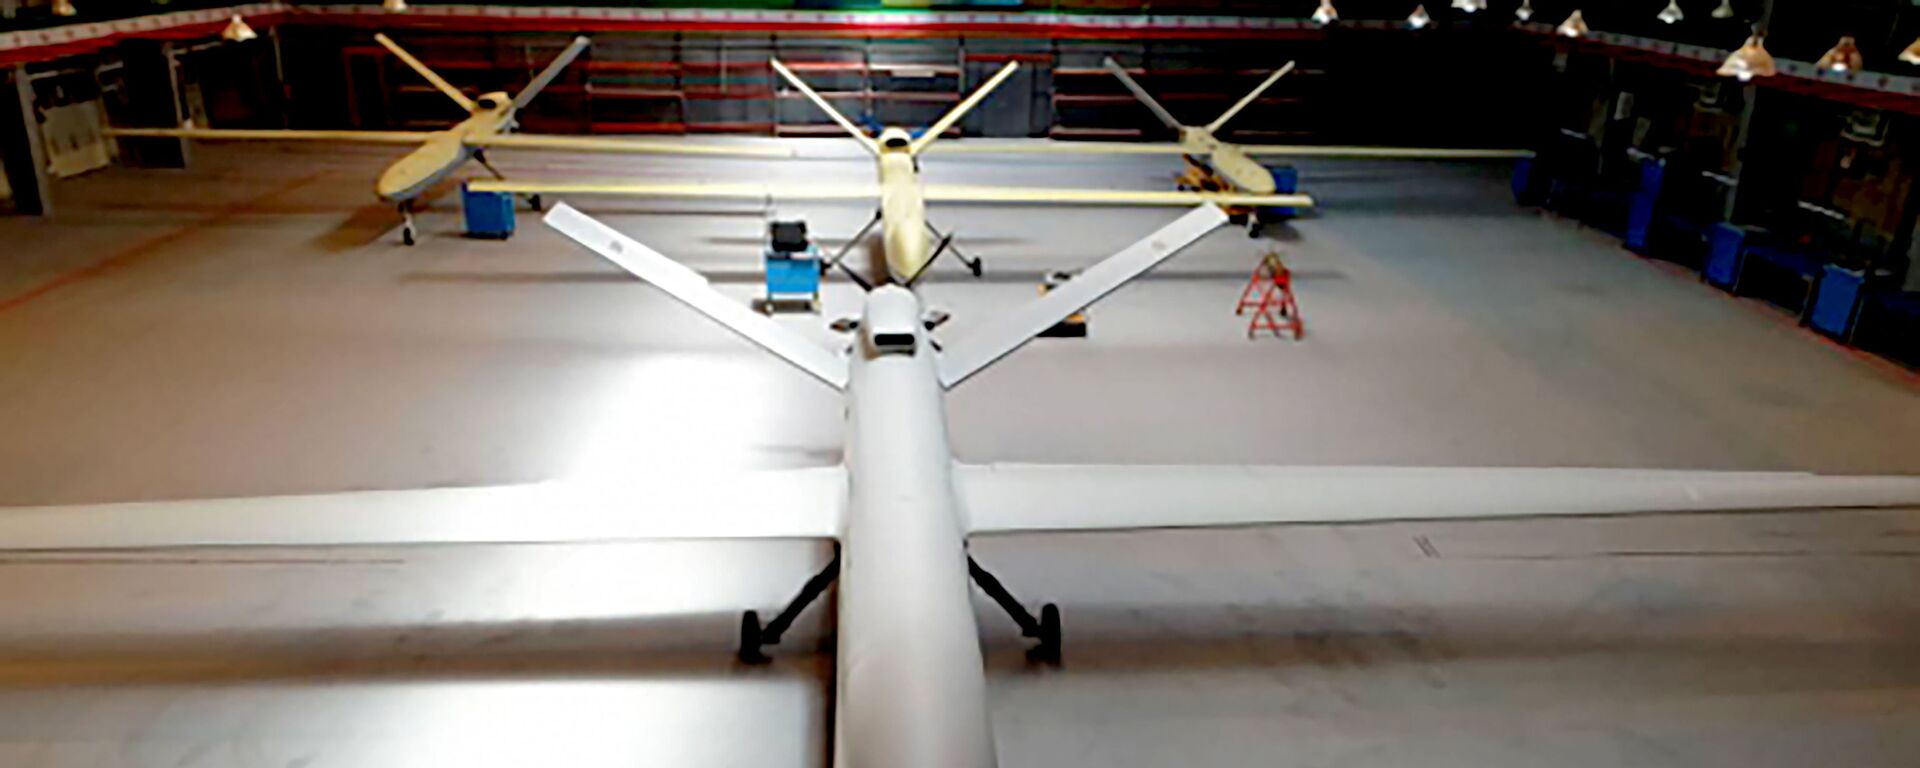 In this photo released on Saturday, May 21, 2021, by Sepahnews, the website of the Iranian Revolutionary Guard, a new Gaza drone is displayed in an undisclosed location in Iran. (Sepahnews via AP) - Sputnik International, 1920, 29.07.2021